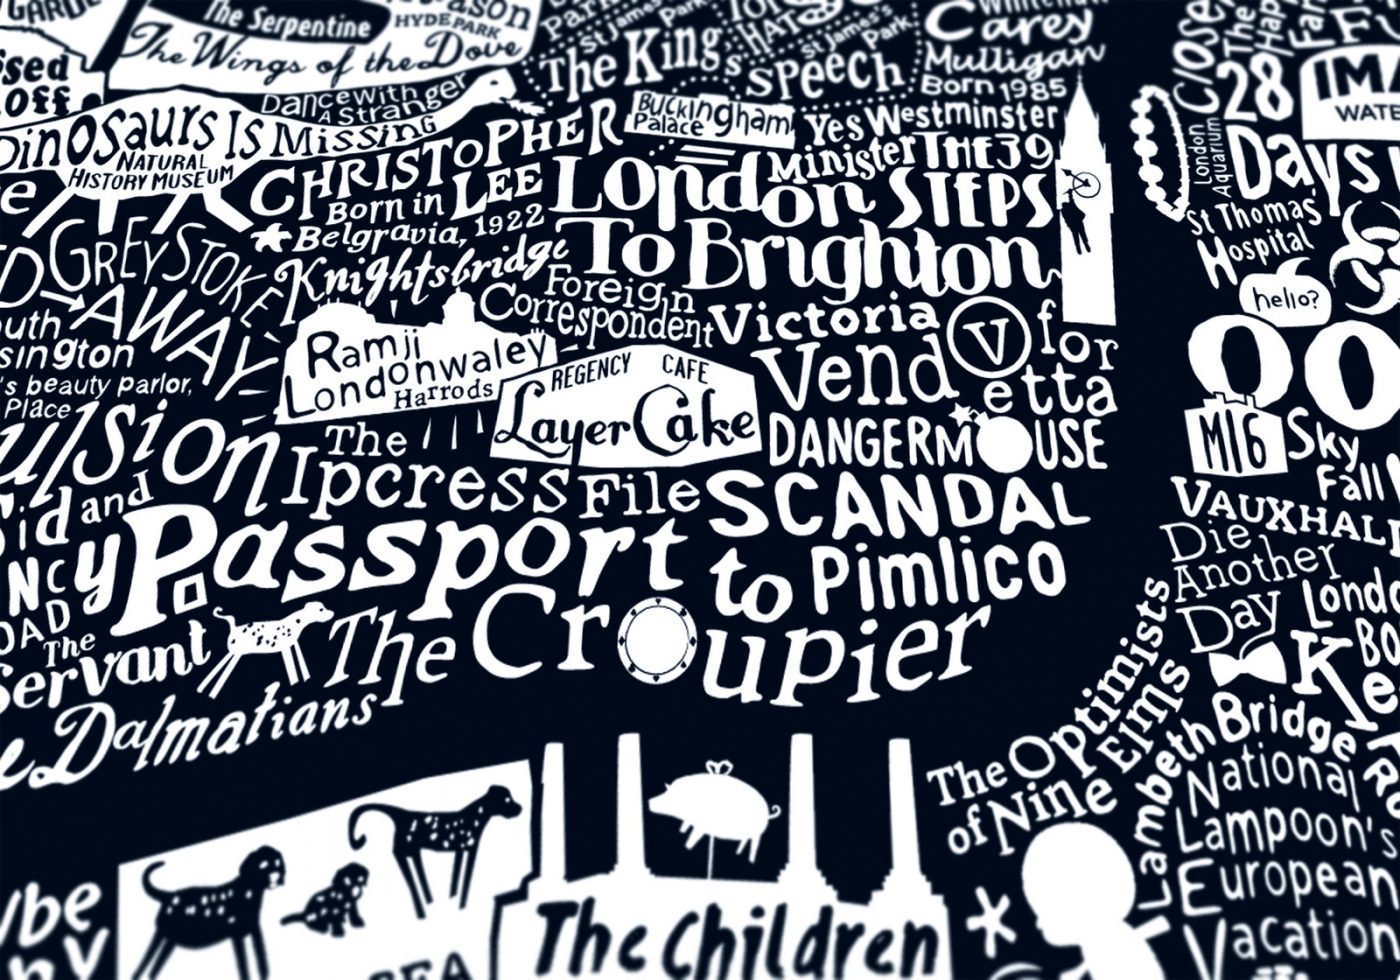 run for the hills Central london film map detail 1 on ArtFinder